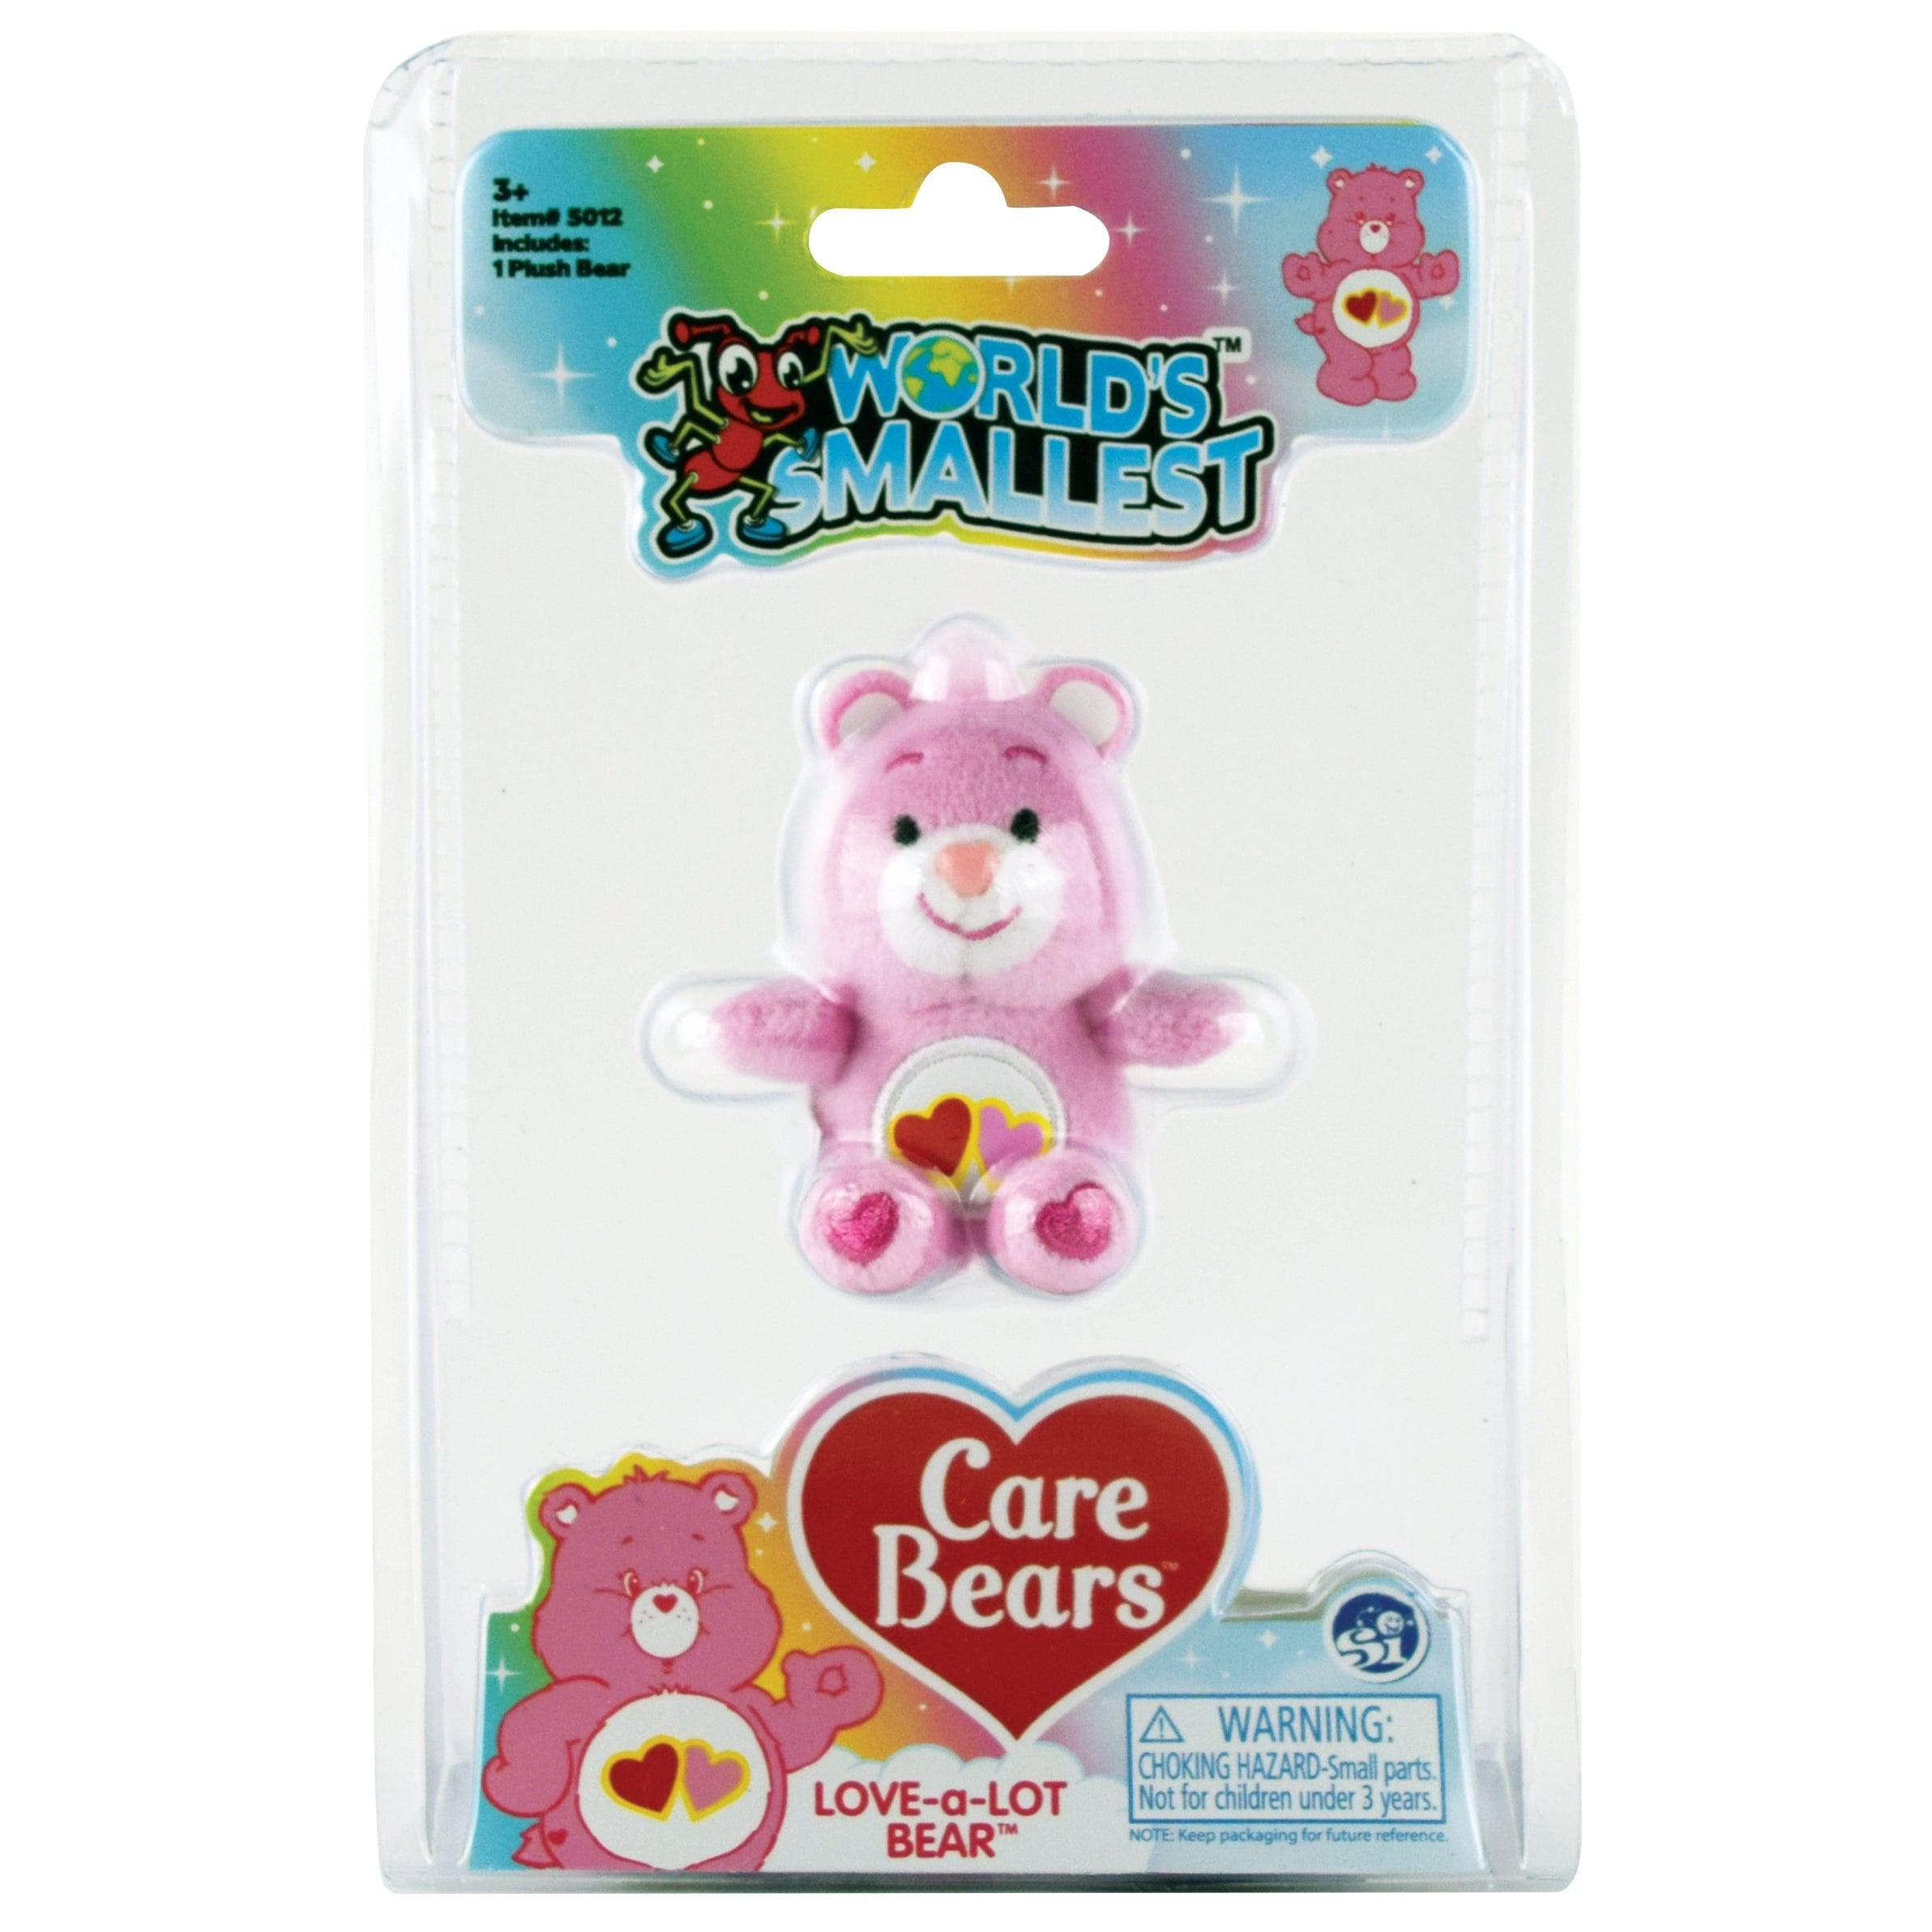 Super Impulse-World's Smallest Care Bears series 2 - Assorted Styles-5012-2-Legacy Toys